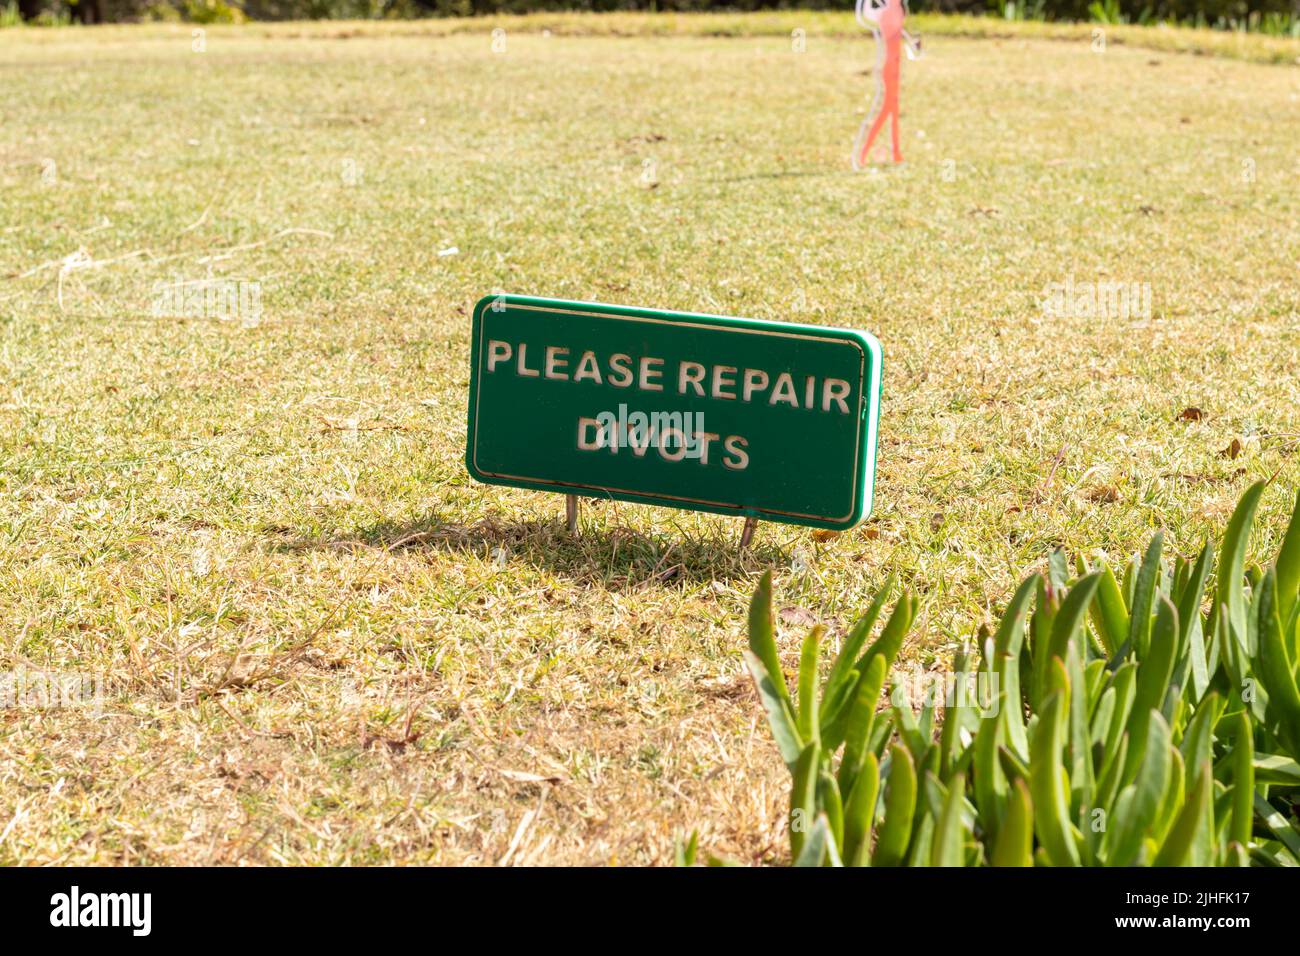 Repair divots sign at a golf course Stock Photo